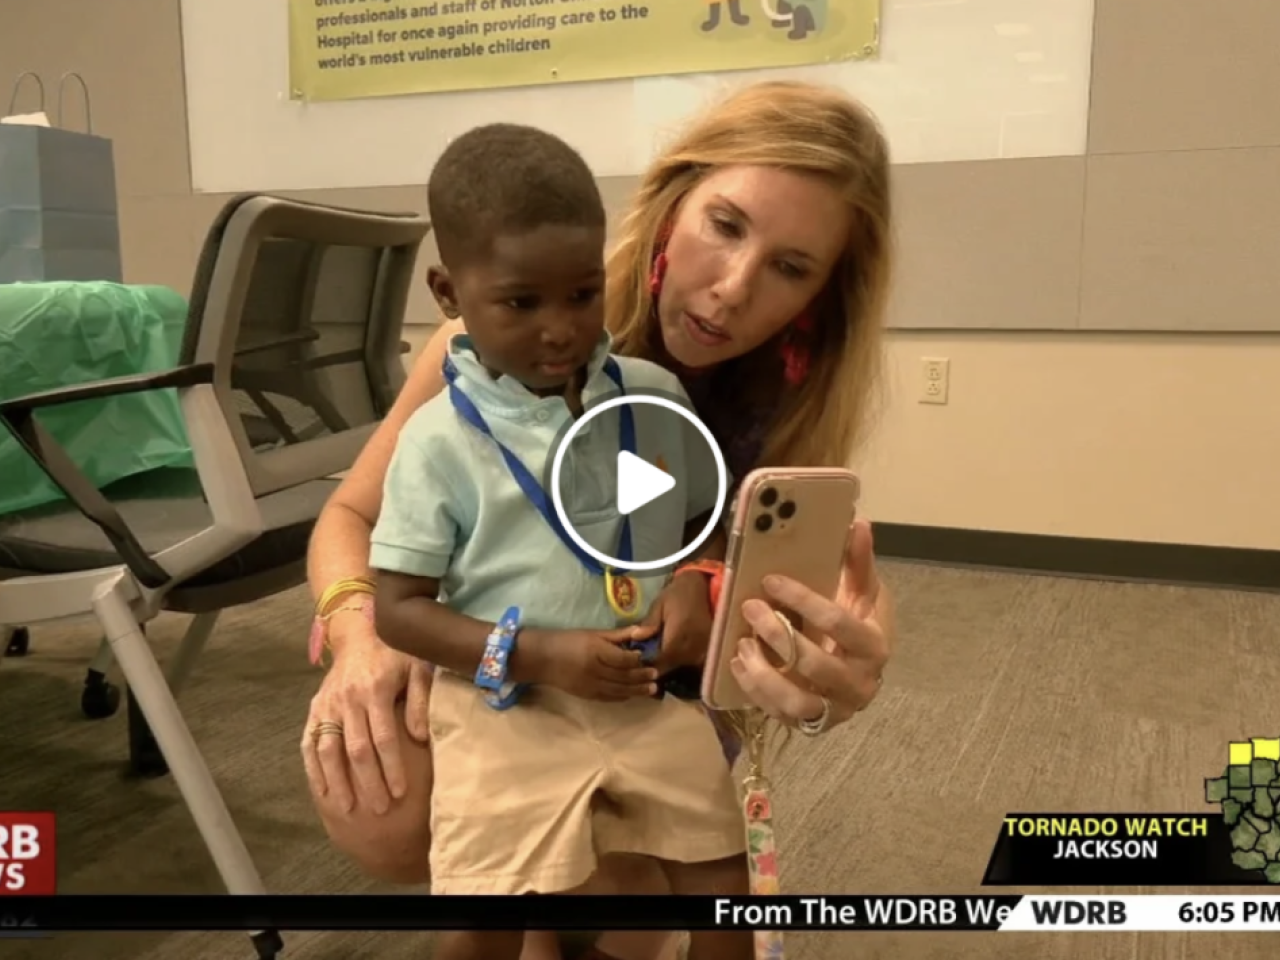 A woman holds up a phone for a child in a light green shirt